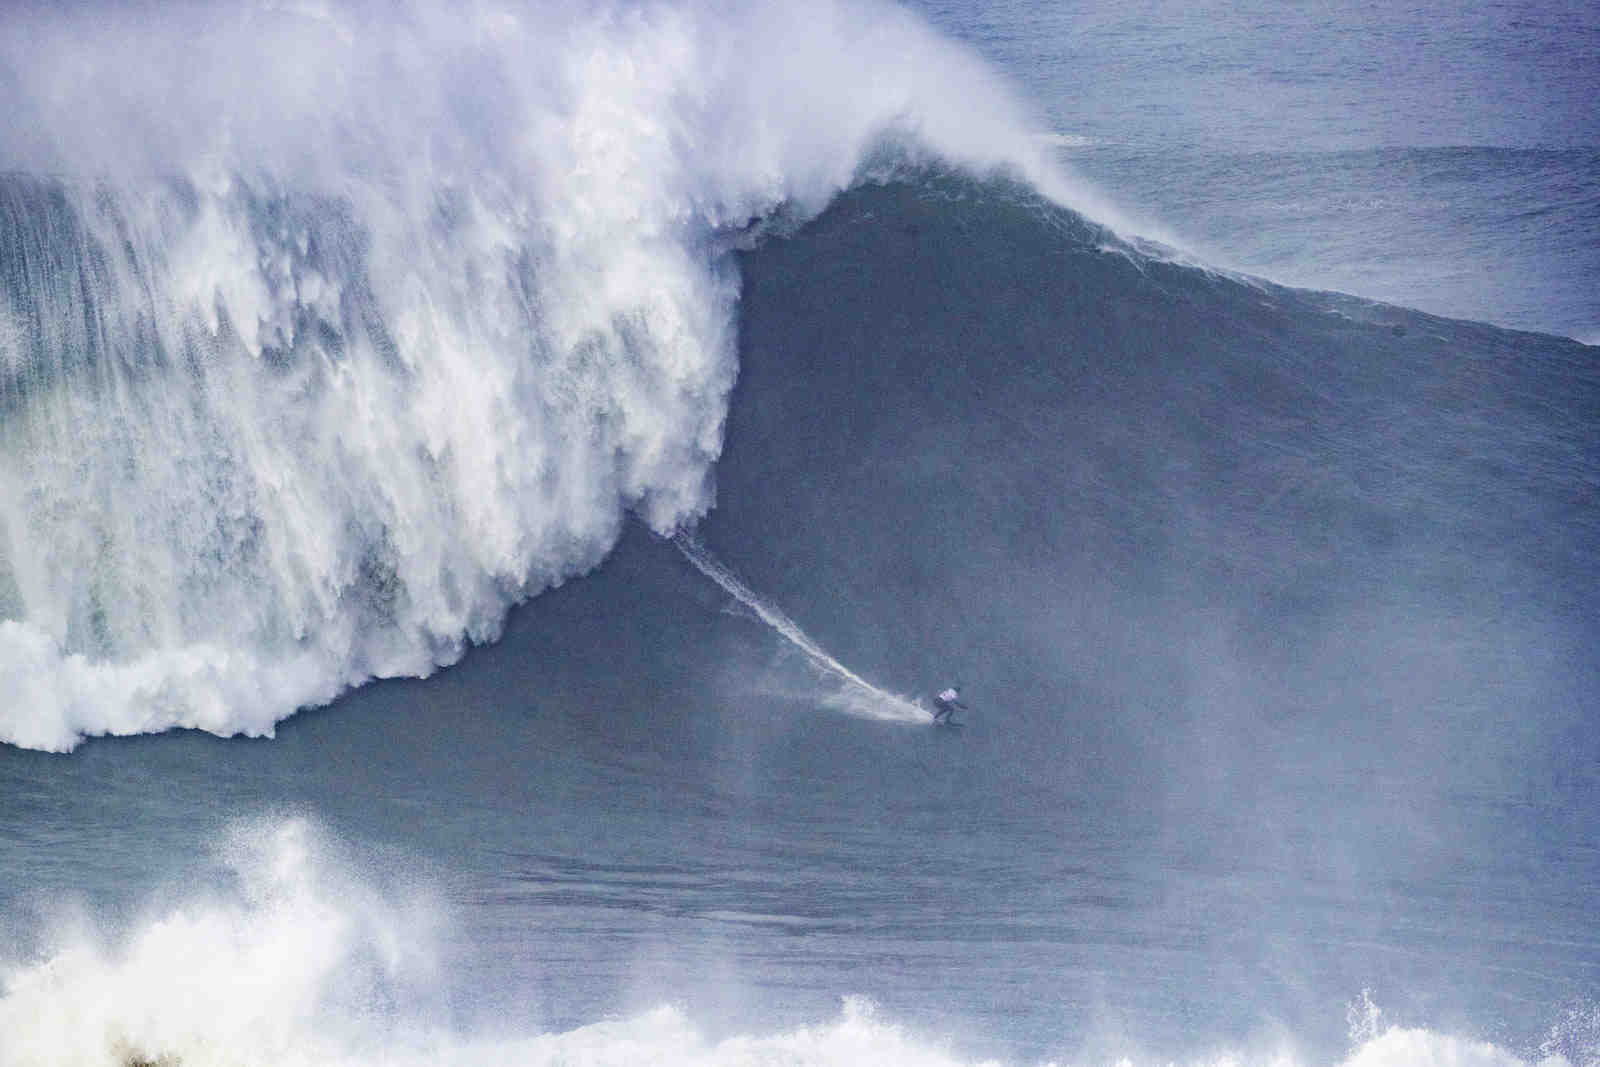 Who rode a 115 foot wave?